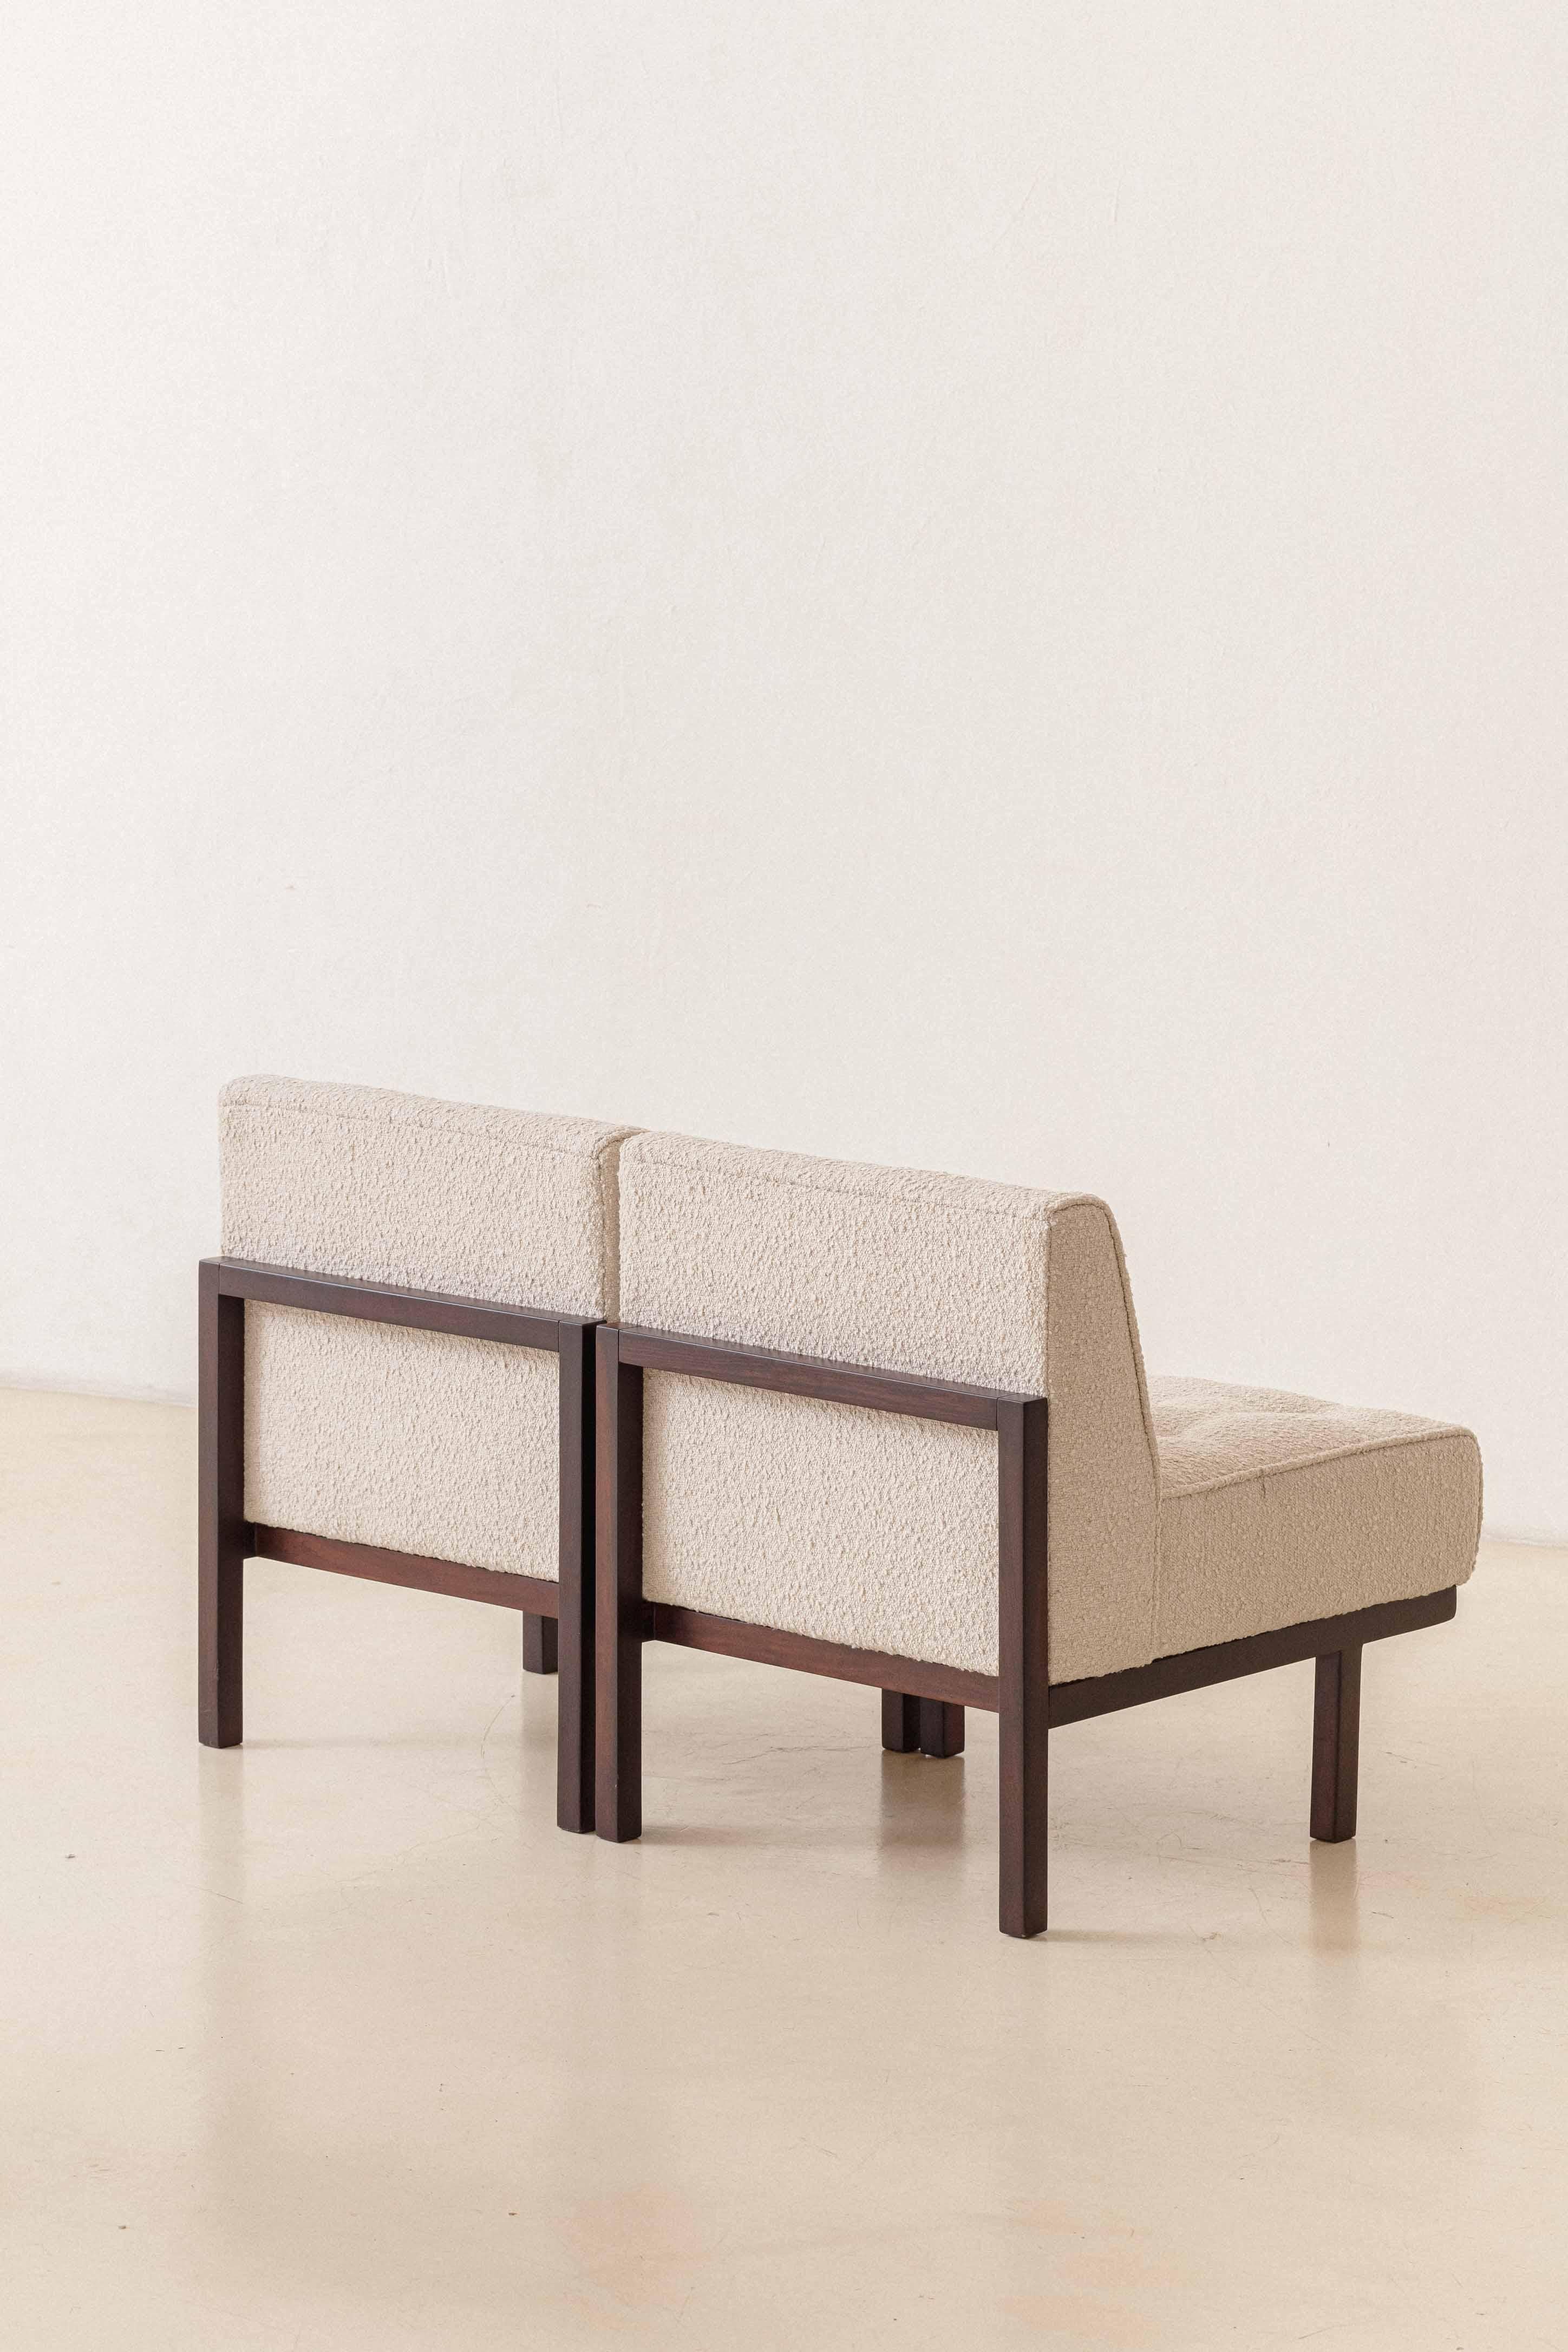 Pair of M1 Armchairs by Brazilian Company Branco & Preto, Midcentury, 1952 For Sale 4